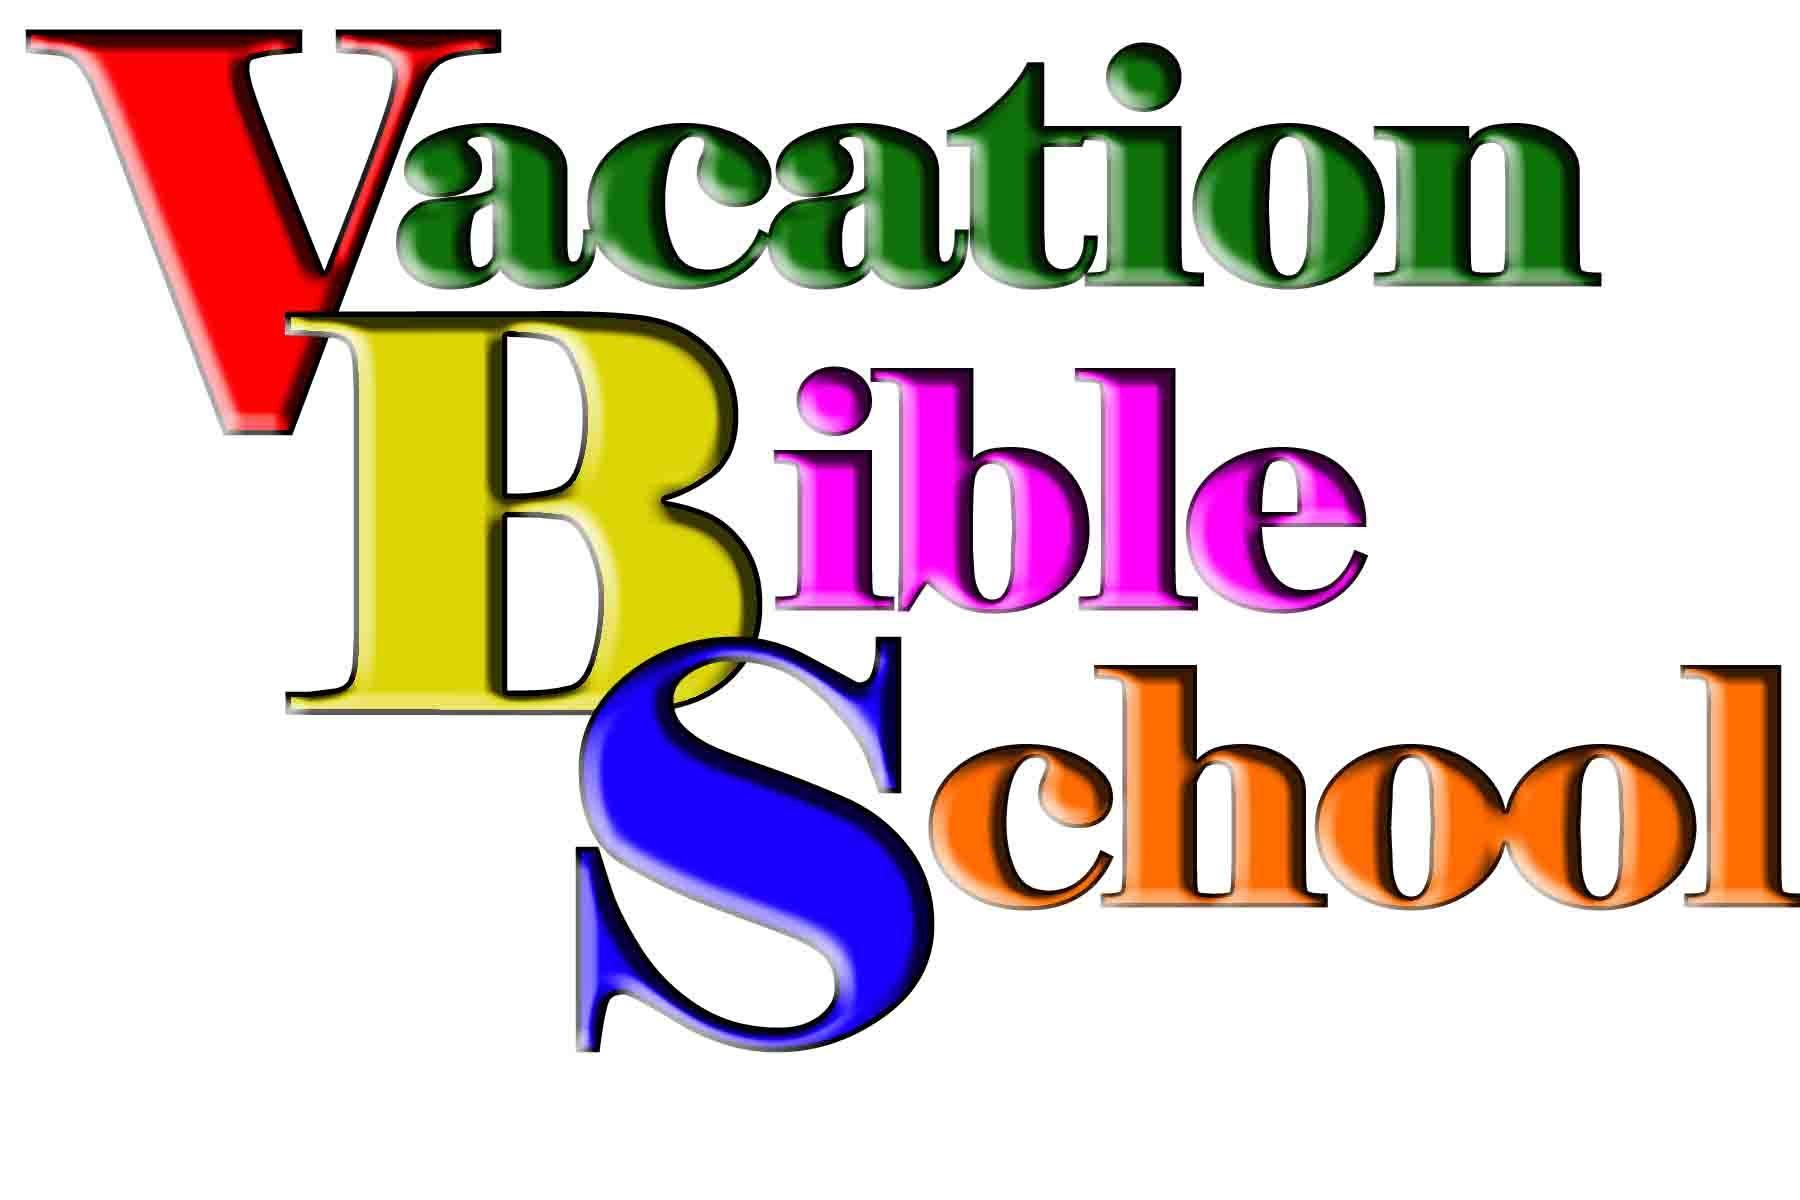 Png Royalty Free For Vacation Bible School - Rr Collections - Free Printable Vacation Bible School Materials